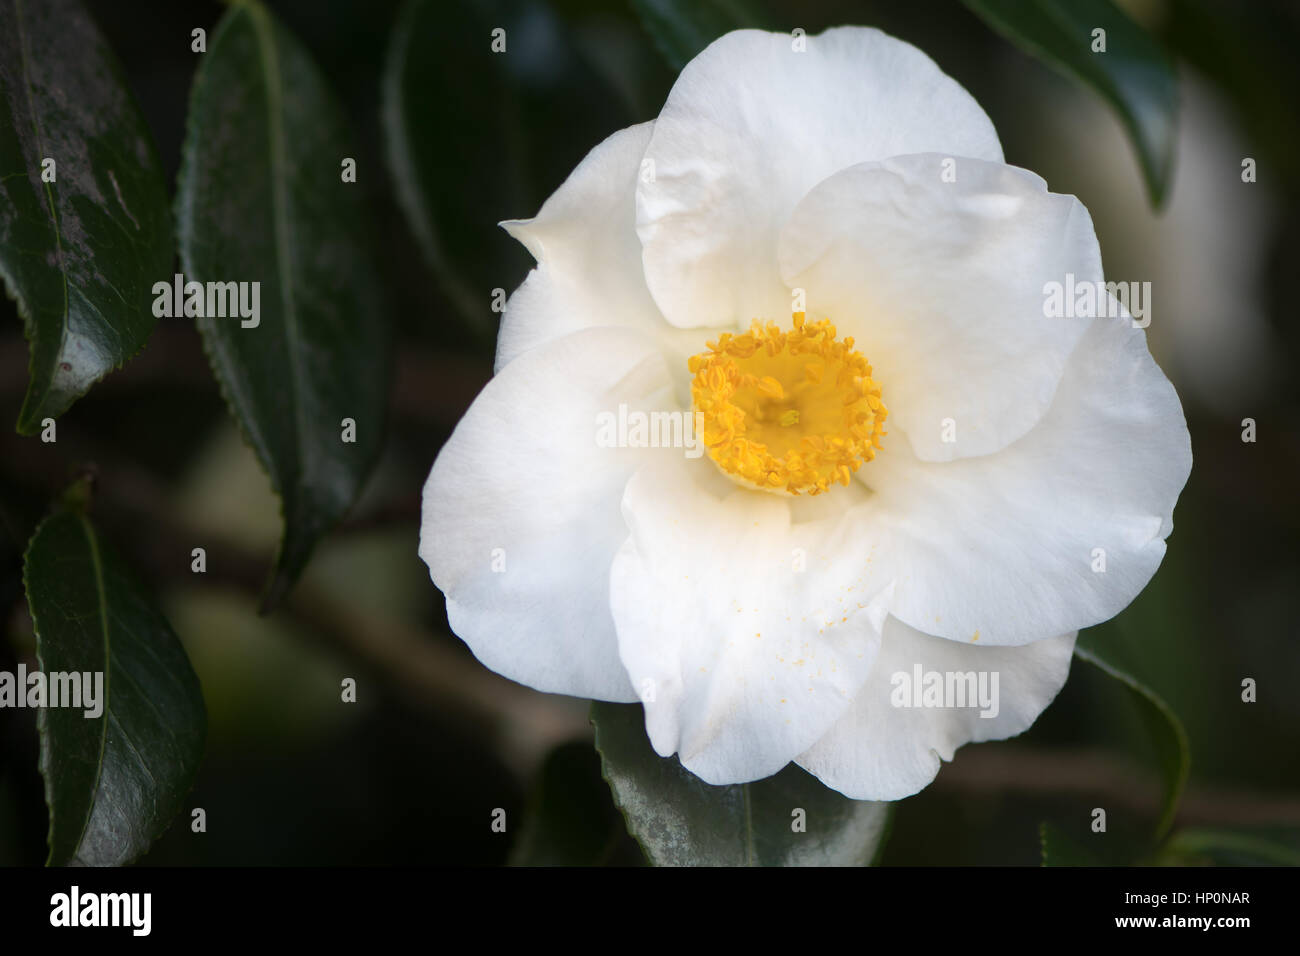 White Camellia in flower with yellow stamens Single flower with seven regular petals, with prominent display of stamens and pistils Stock Photo